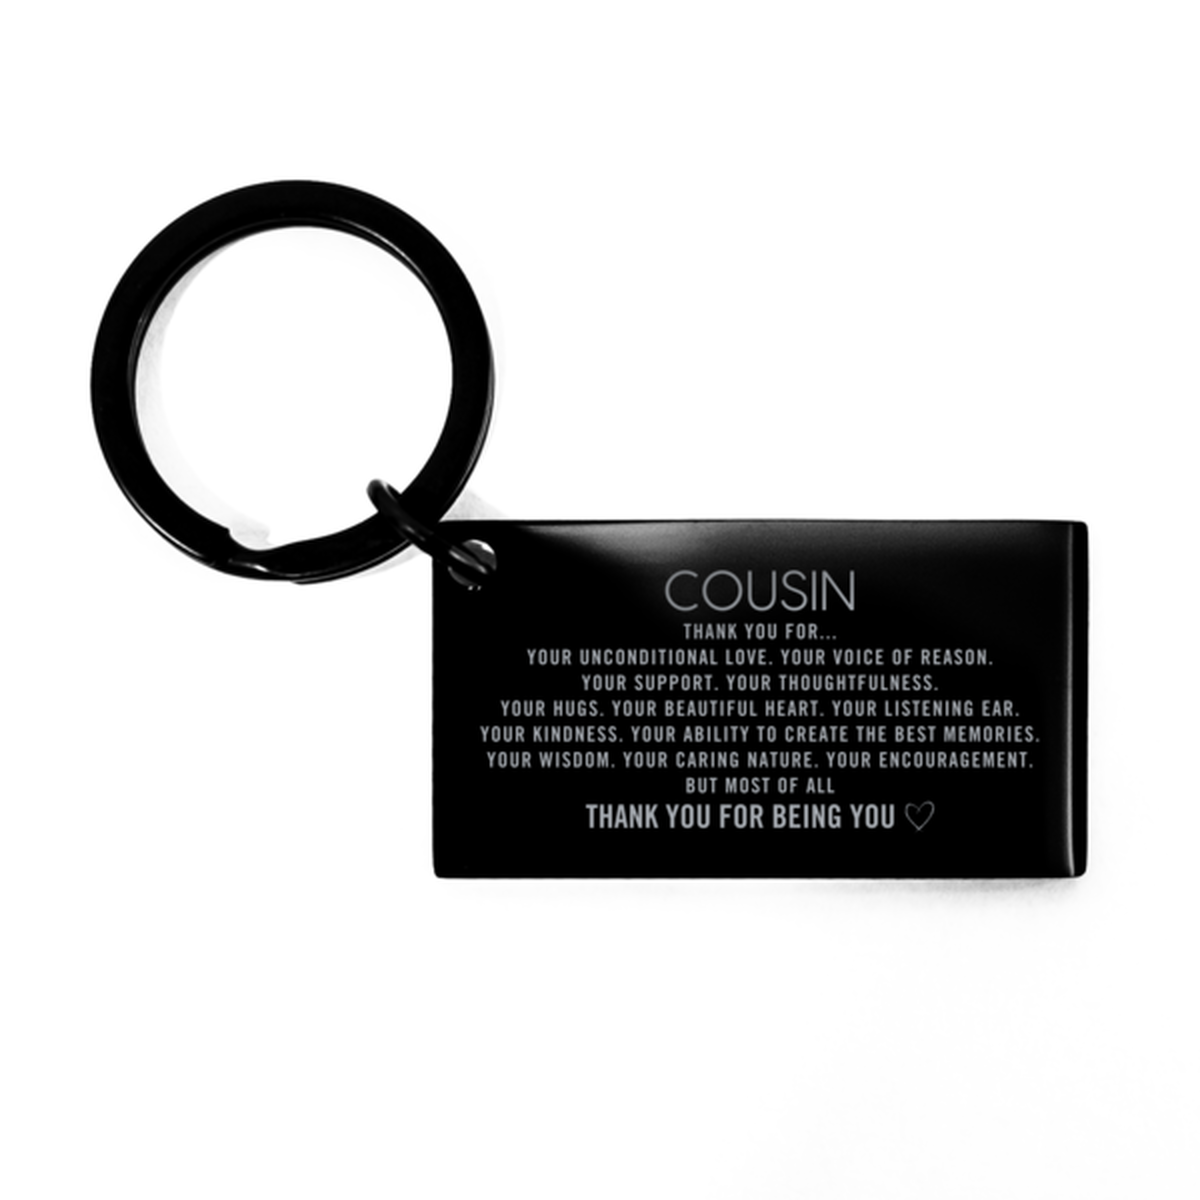 Cousin Keychain Custom, Engraved Gifts For Cousin Christmas Graduation Birthday Gifts for Men Women Cousin Thank you for Your unconditional love